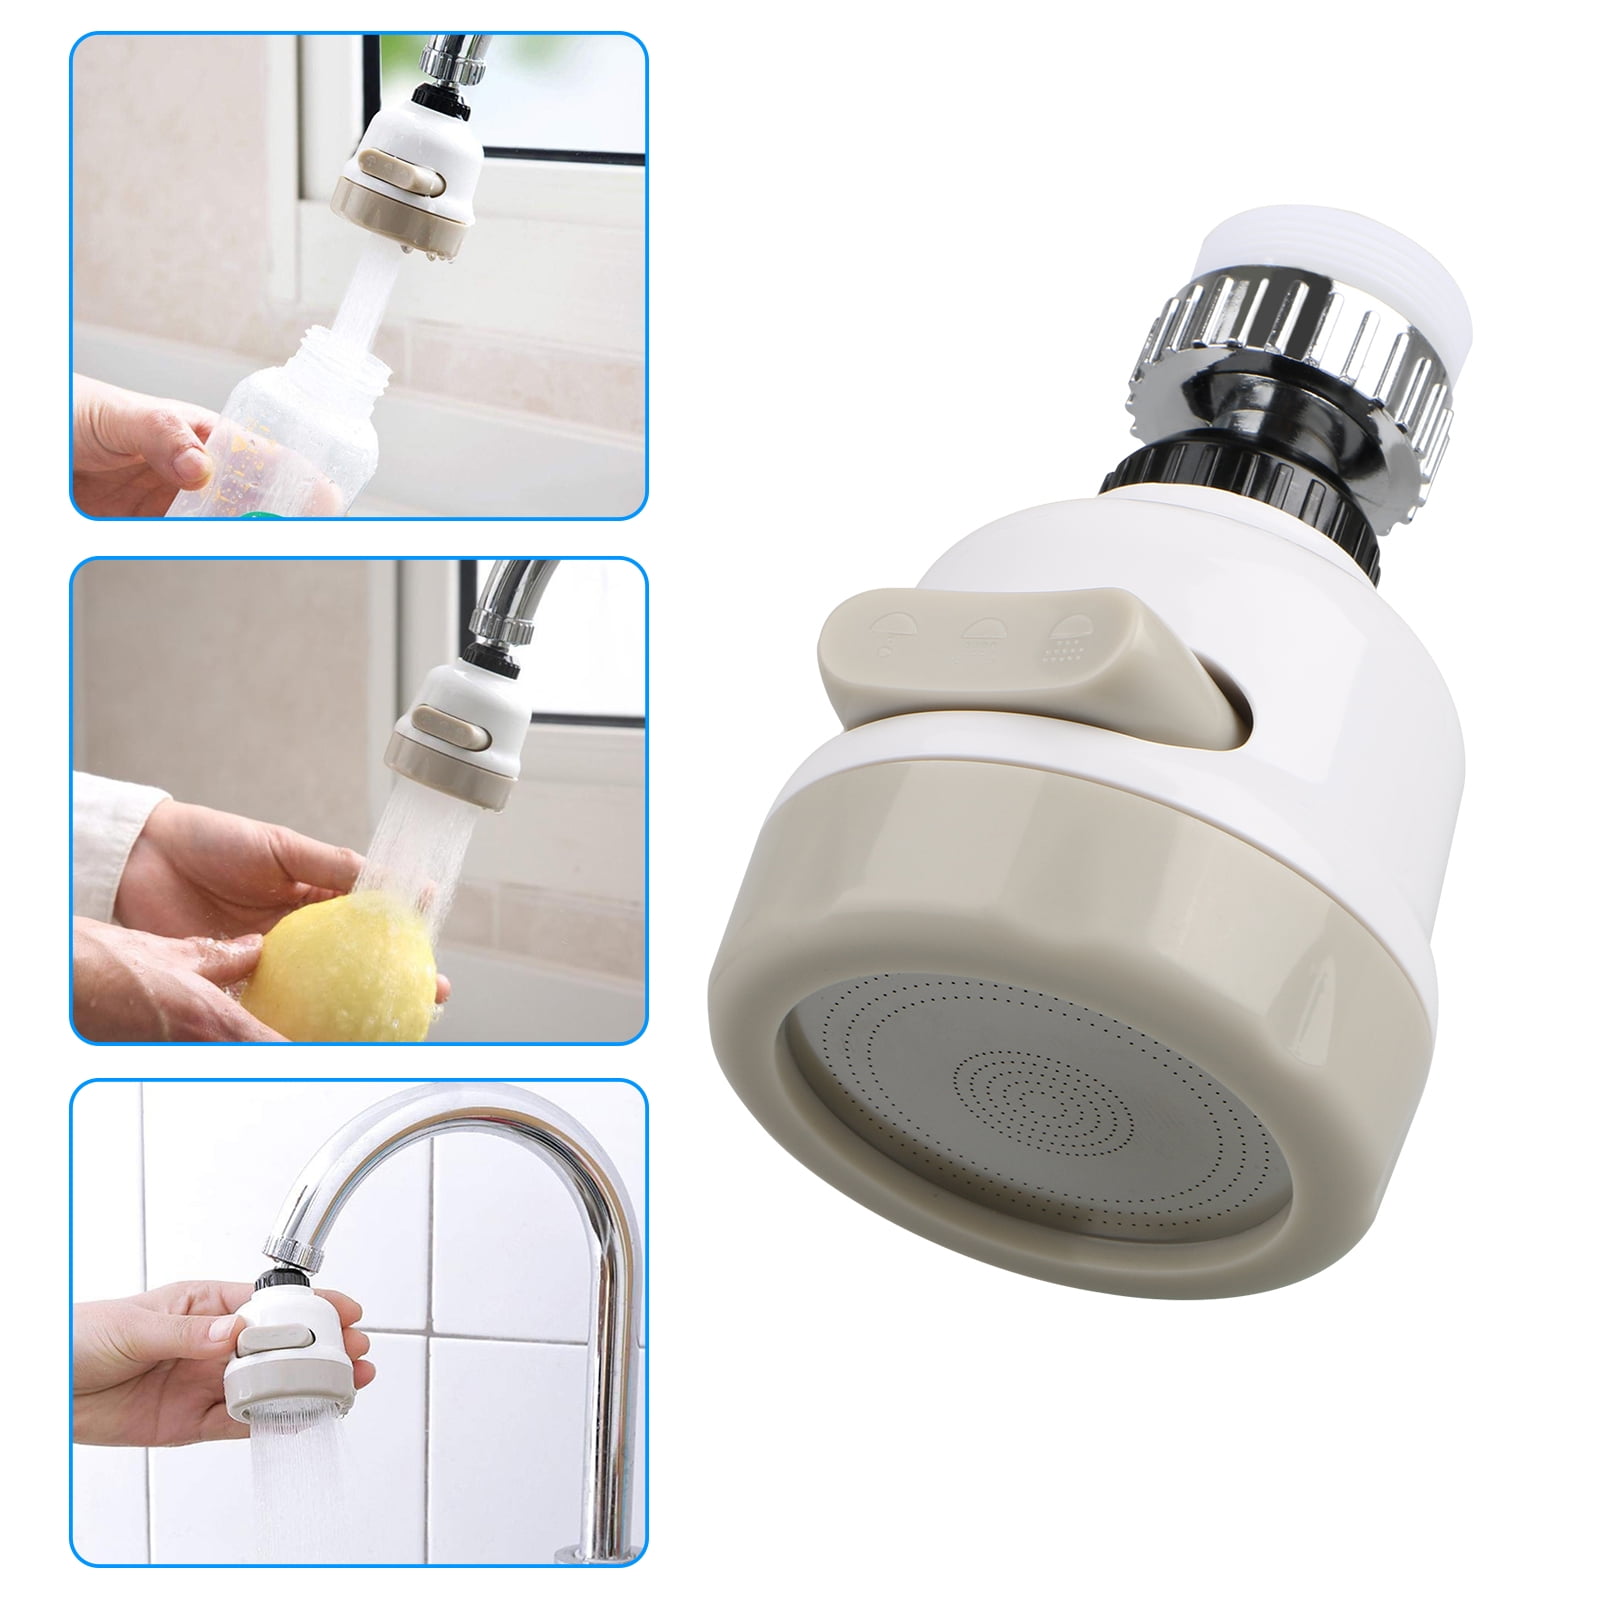 Faucets Nozzle Sprayer Head Water Tap Attachment Spray Aerator for Kitchen Sink